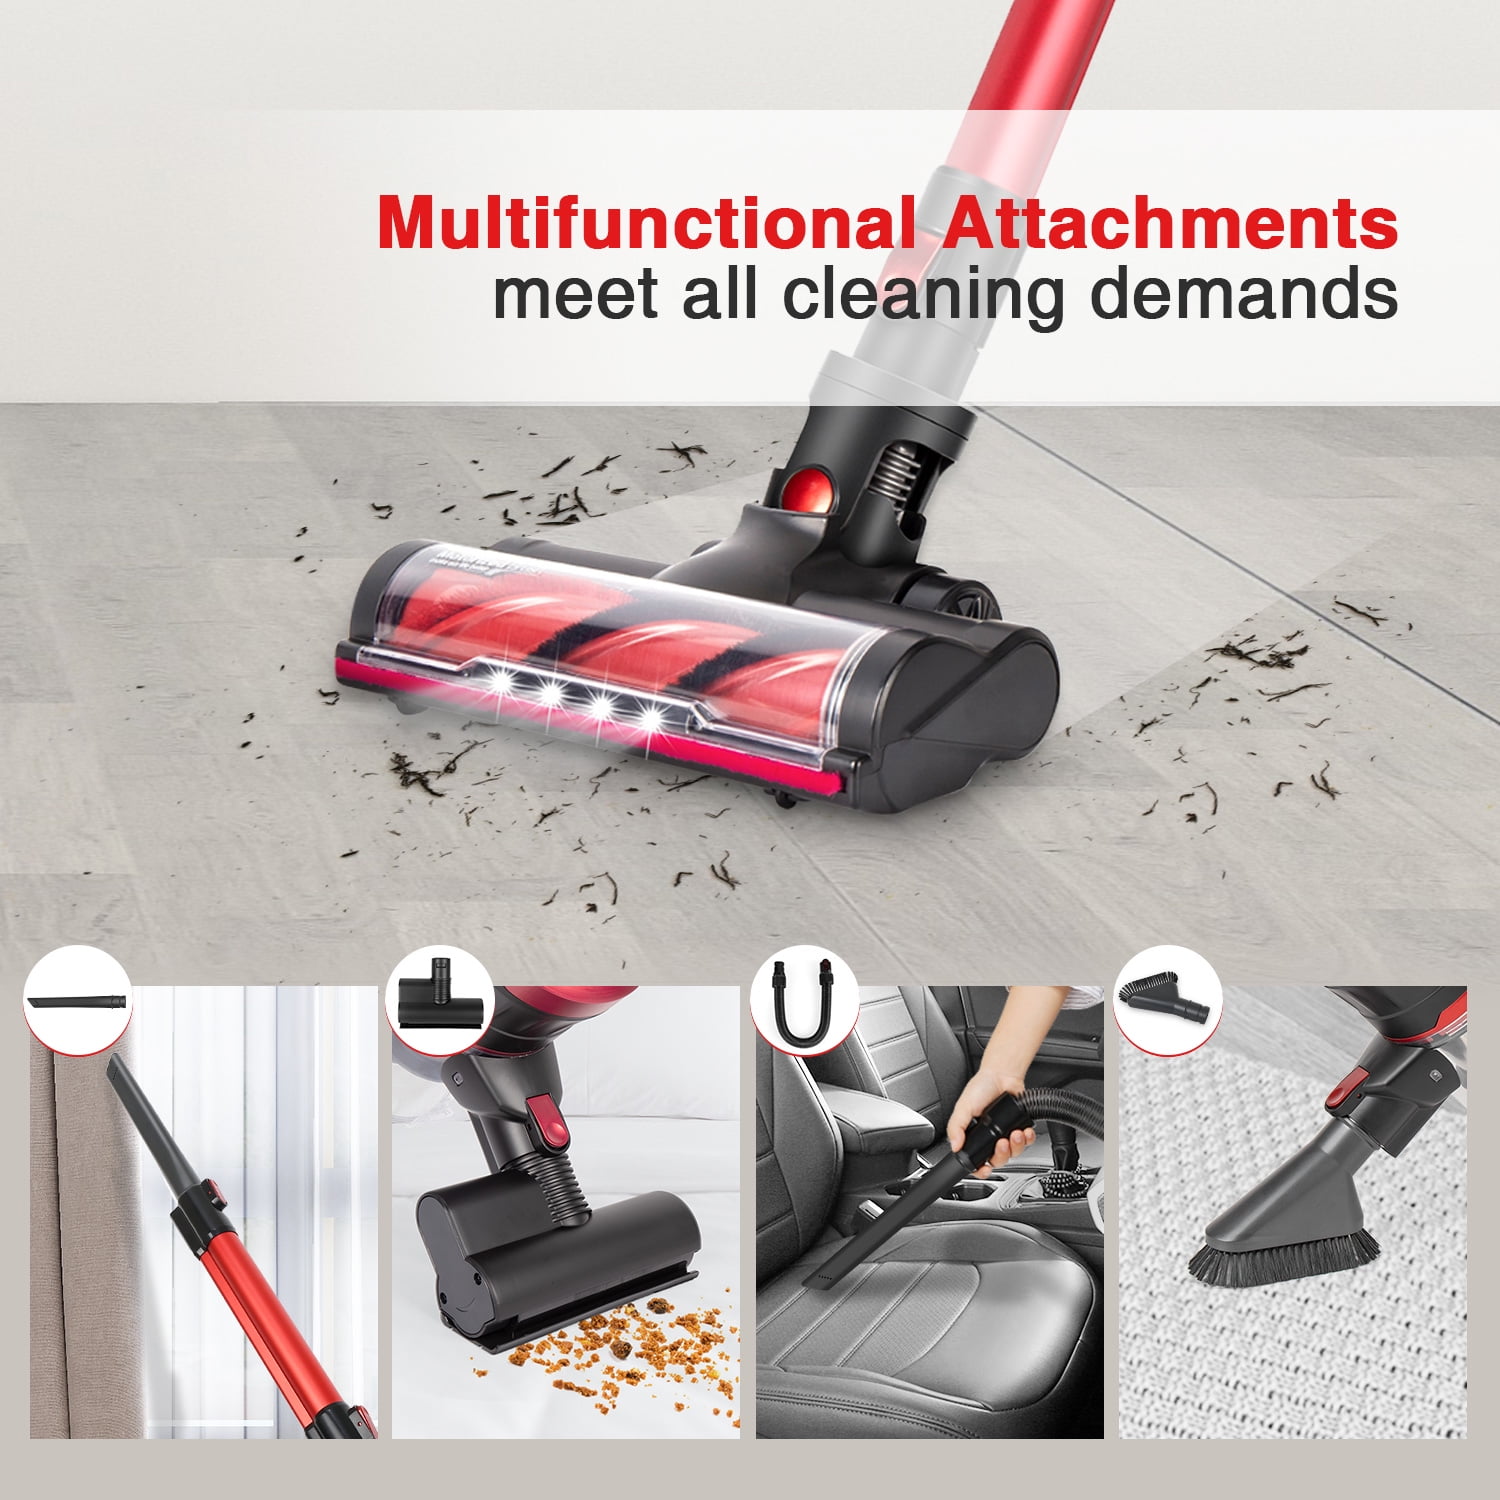 Moosoo 23Kpa Cordless Stick Vacuum Cleaner with Rich Accessories for Carpet Hard Floor Pet Hair - image 4 of 12